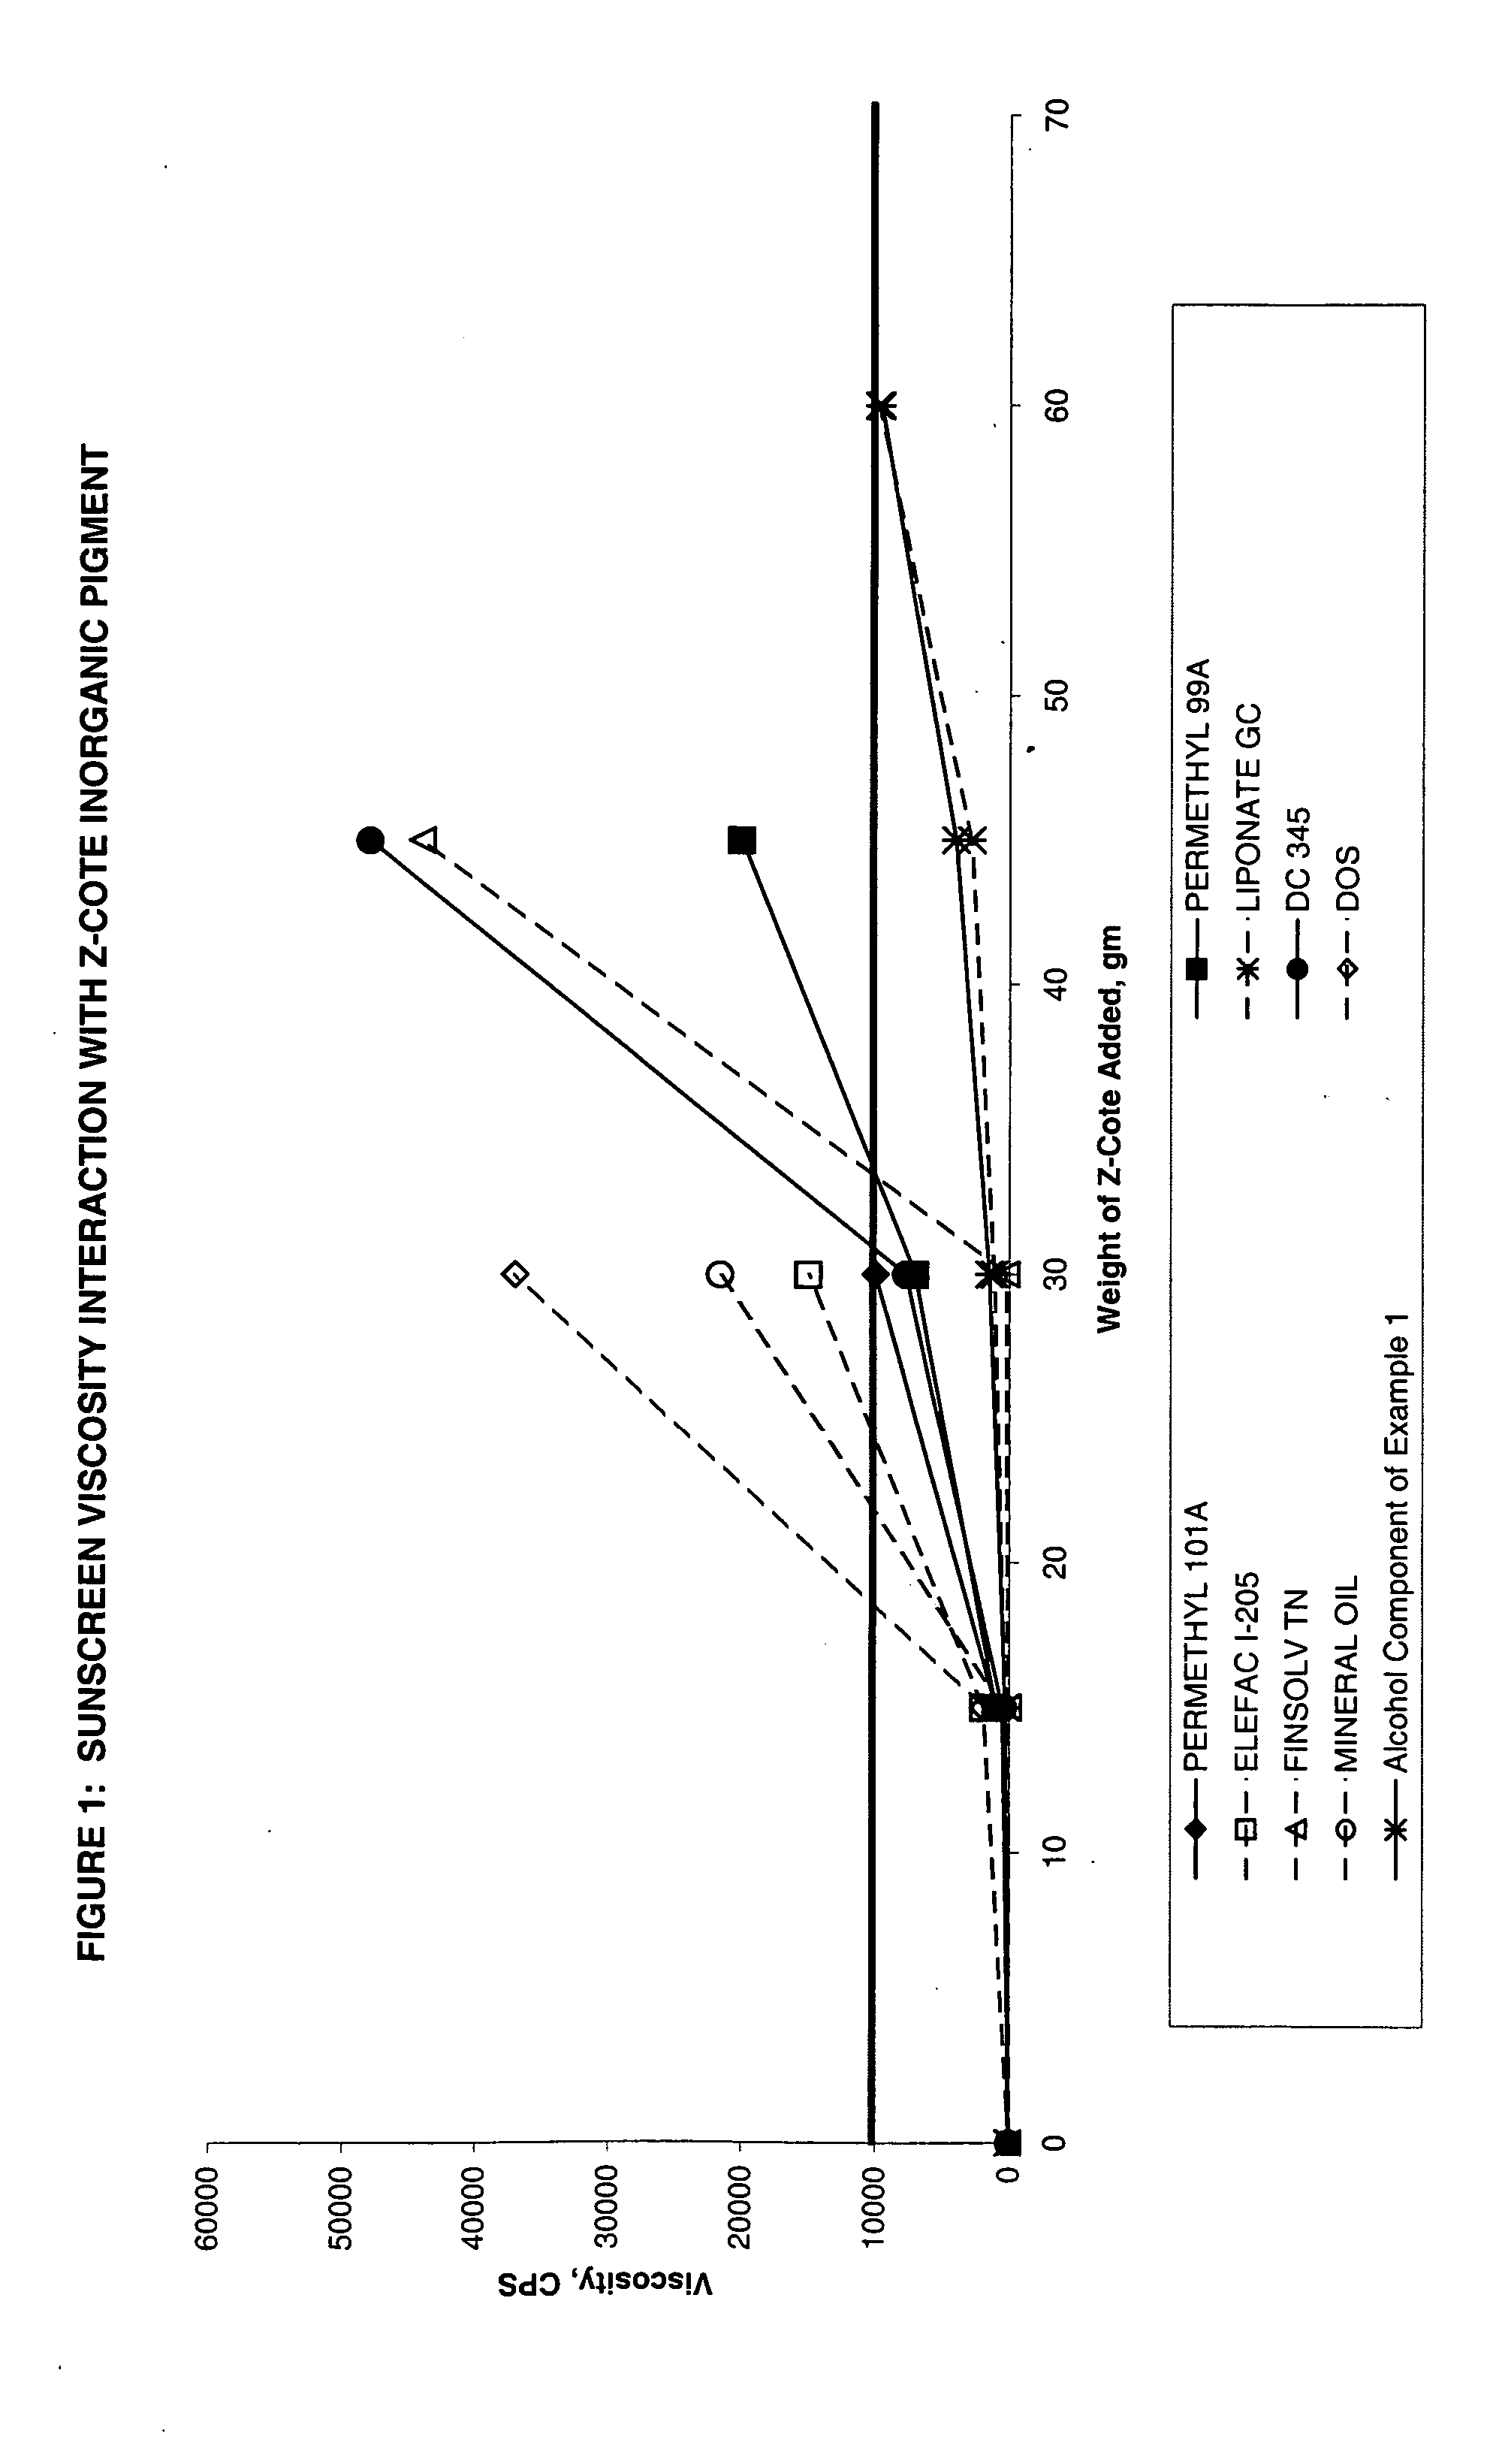 Personal care compositions containing highly branched primary alcohol component